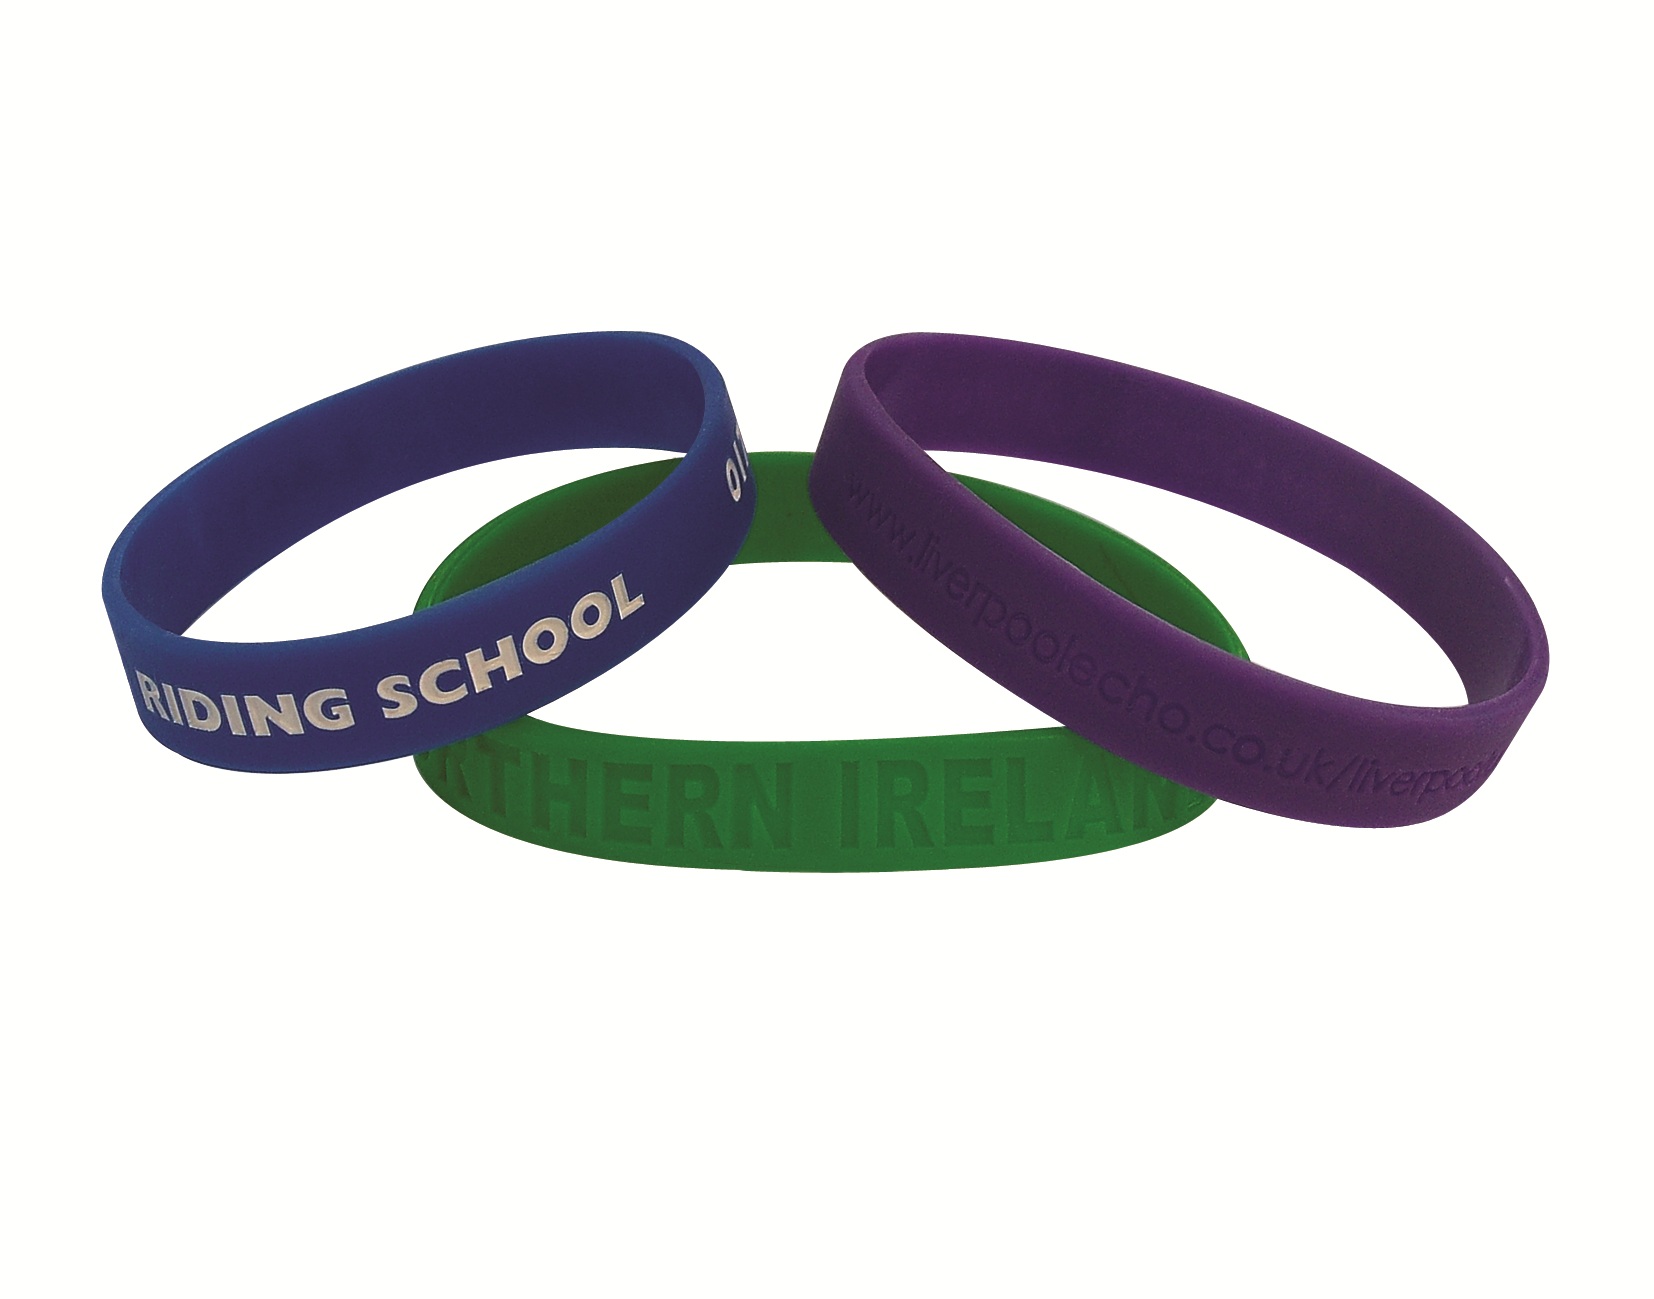 Promotional Debossed Silicone Wristband